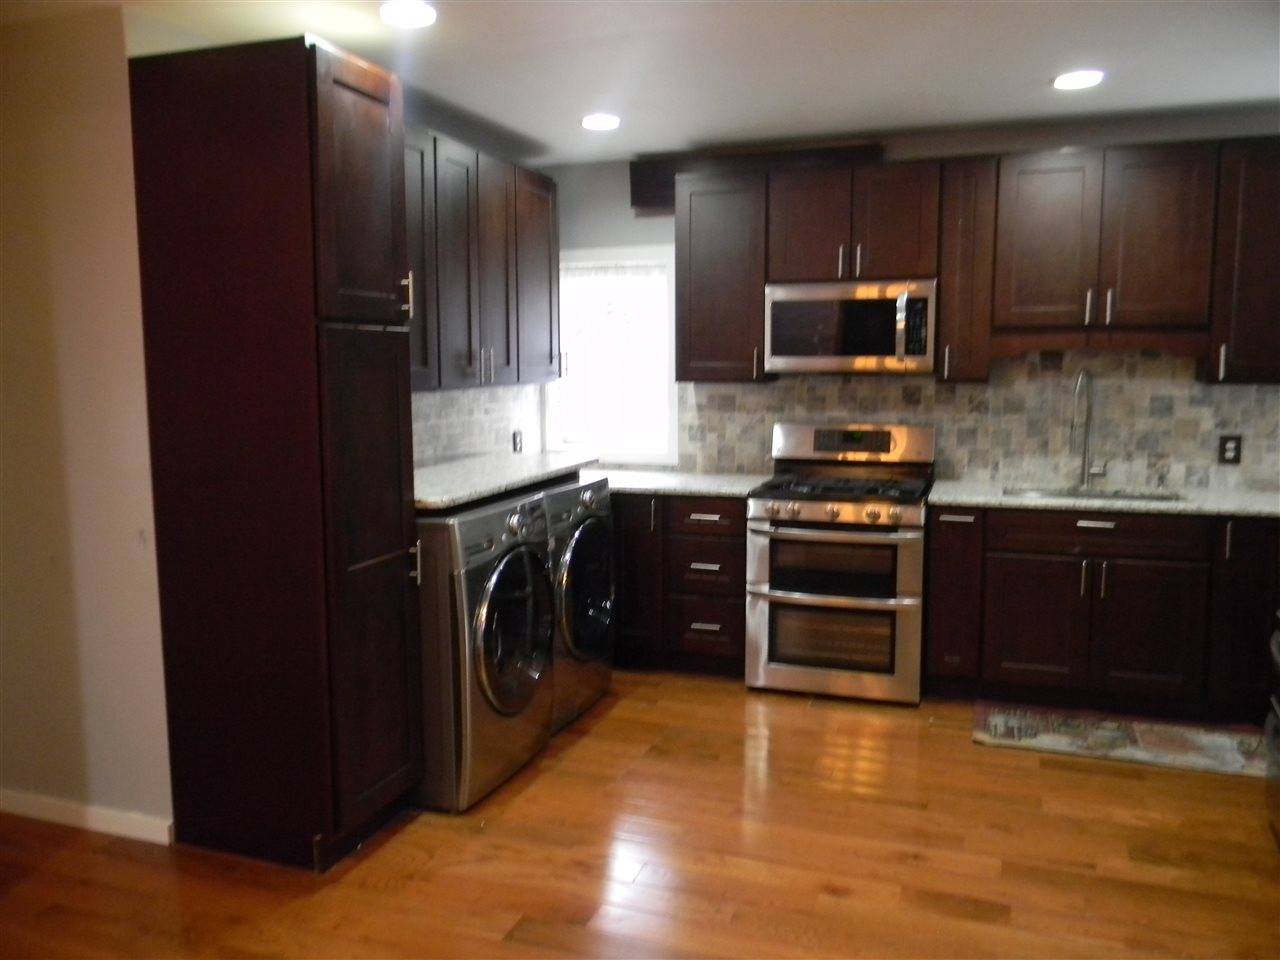 3 BEDROOMS CENTRALLY LOCATED IN JERSEY CITY HEIGHTS